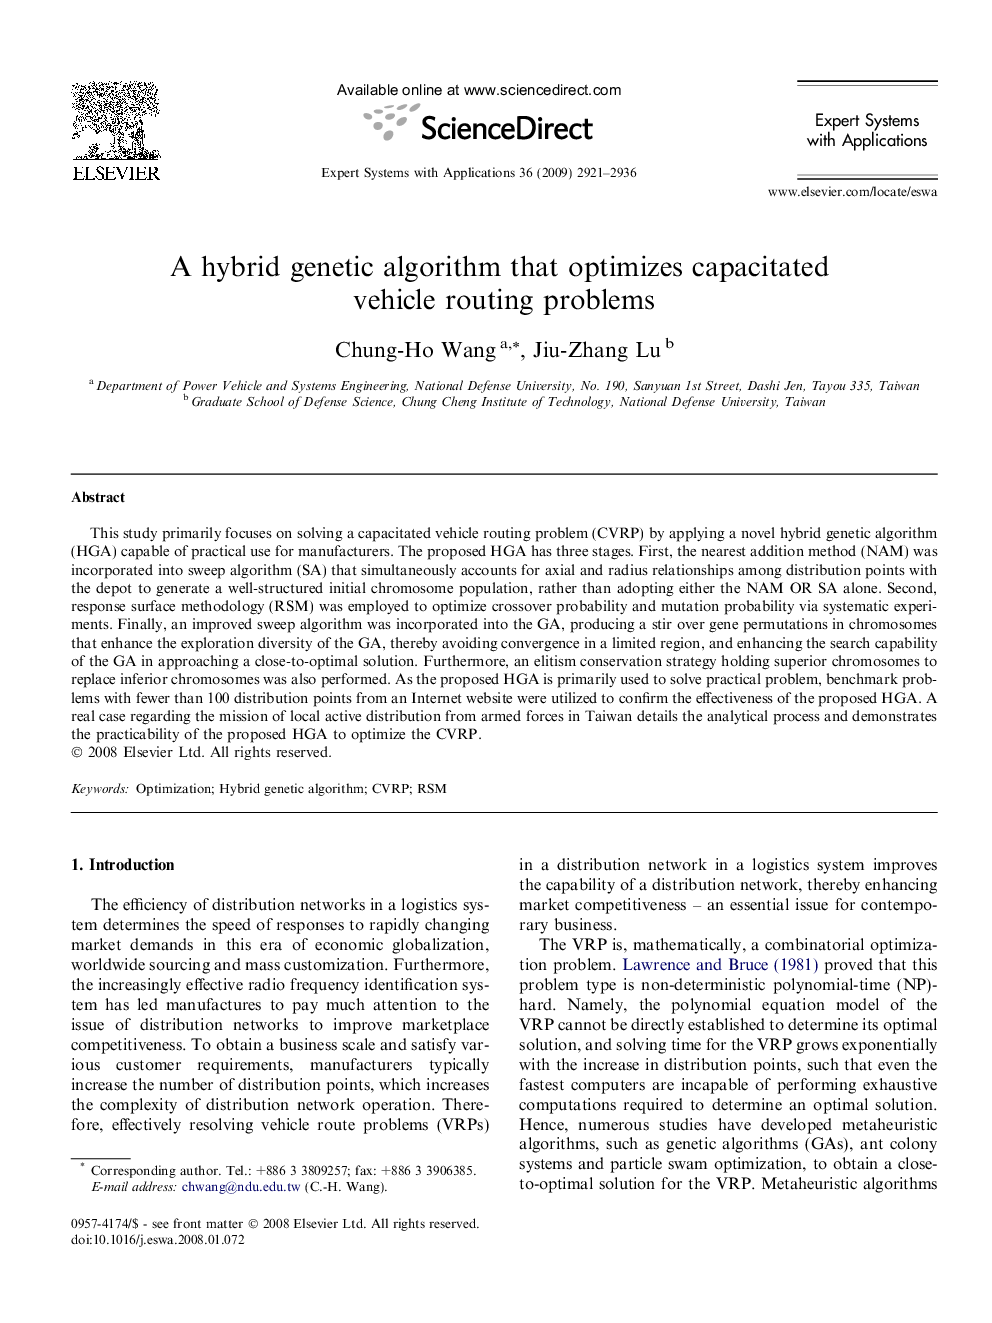 A hybrid genetic algorithm that optimizes capacitated vehicle routing problems